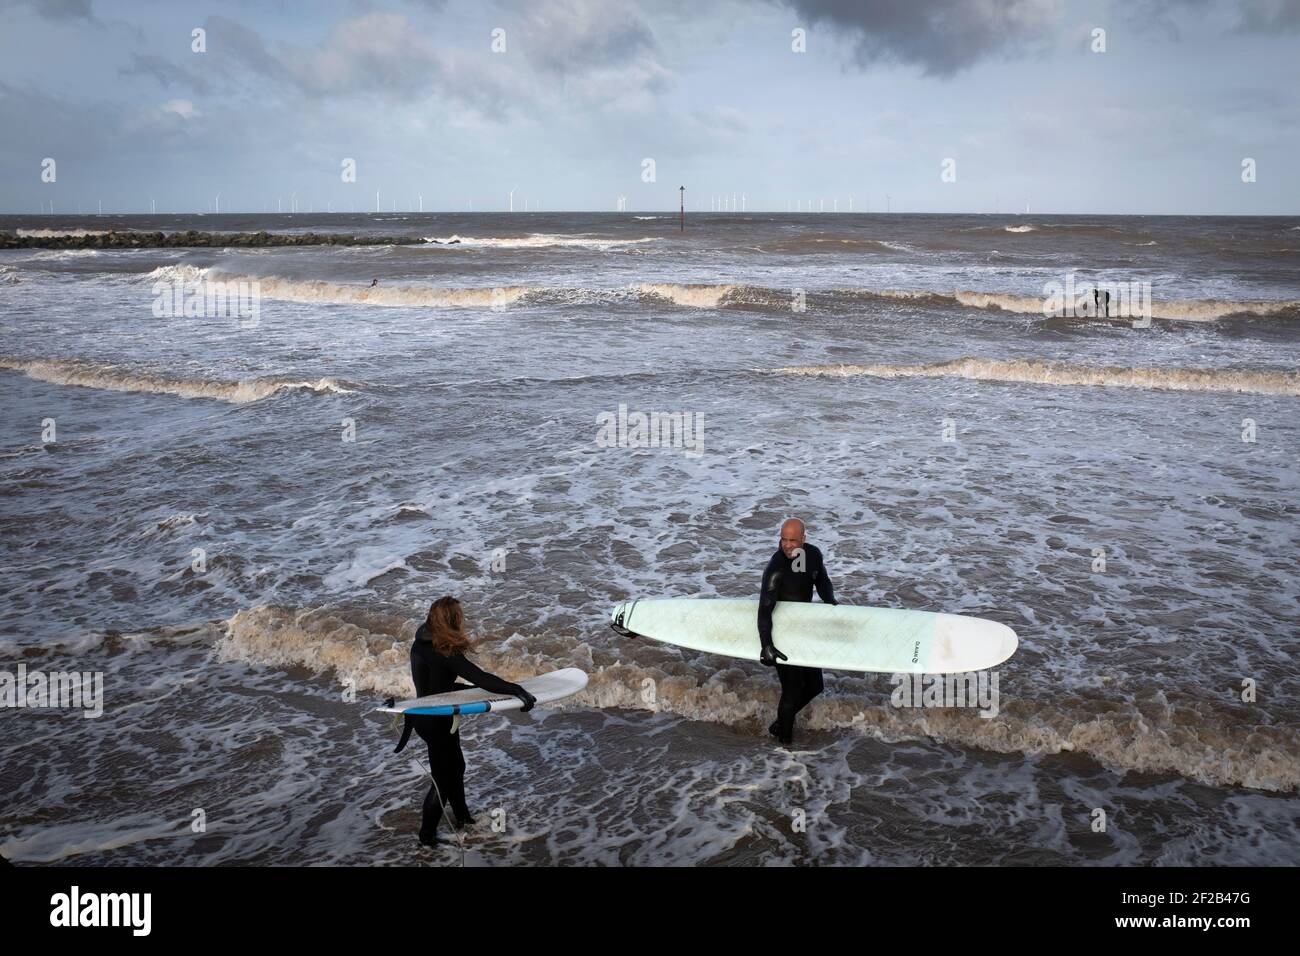 A group of surfers in the sea in the mouth of the river Mersey. High tides and a storm which swept across the United Kingdom brought favourable conditions for surfing in Leasowe Bay, Merseyside on 11 March, 2021. Stock Photo